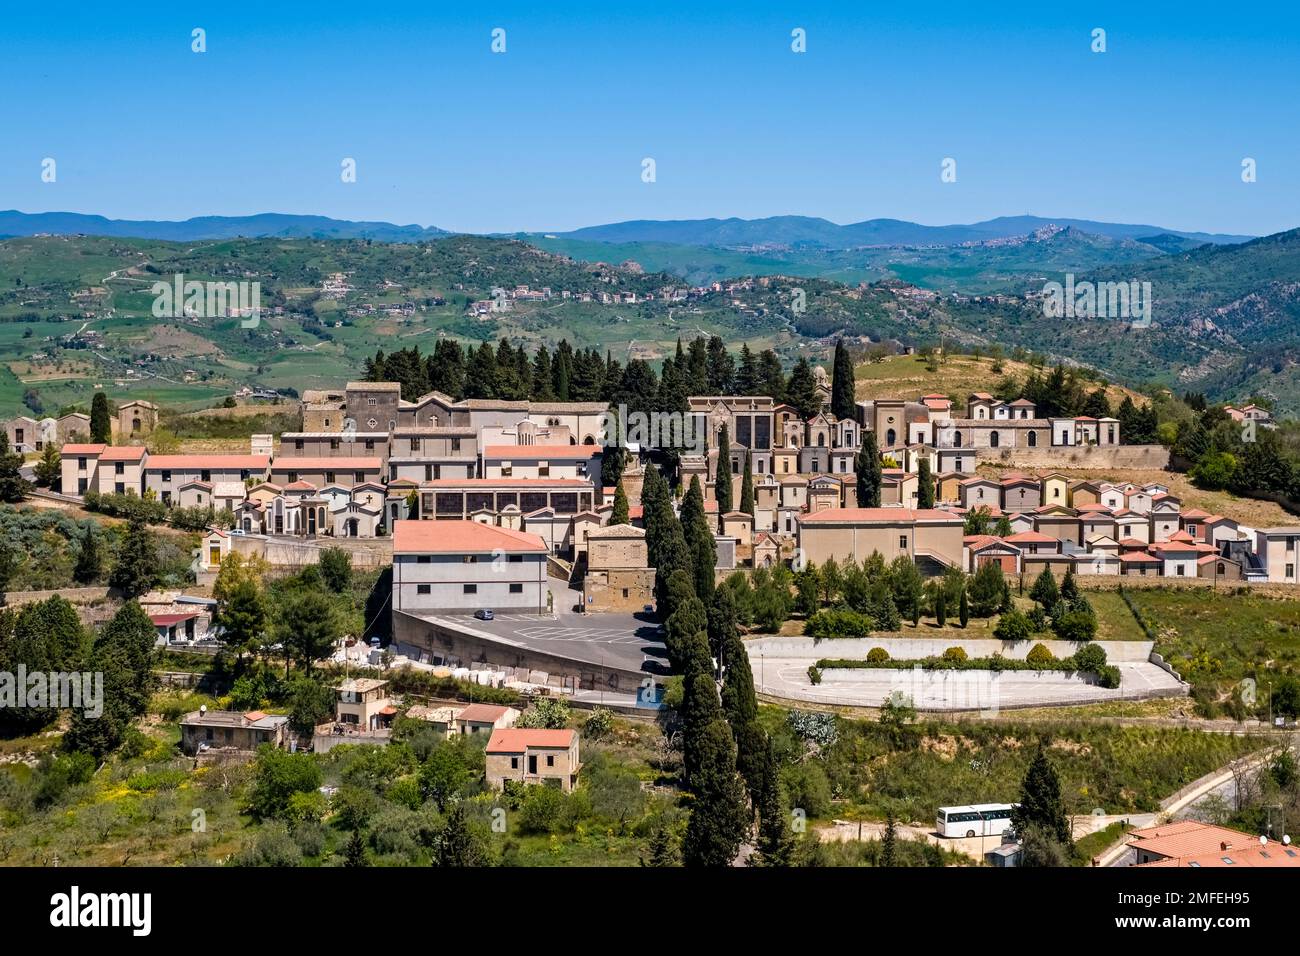 Aerial view on the cemetery of the town of Agira, agricultural landscape with green hills, trees and fields of Central Sicily in the distance. Stock Photo